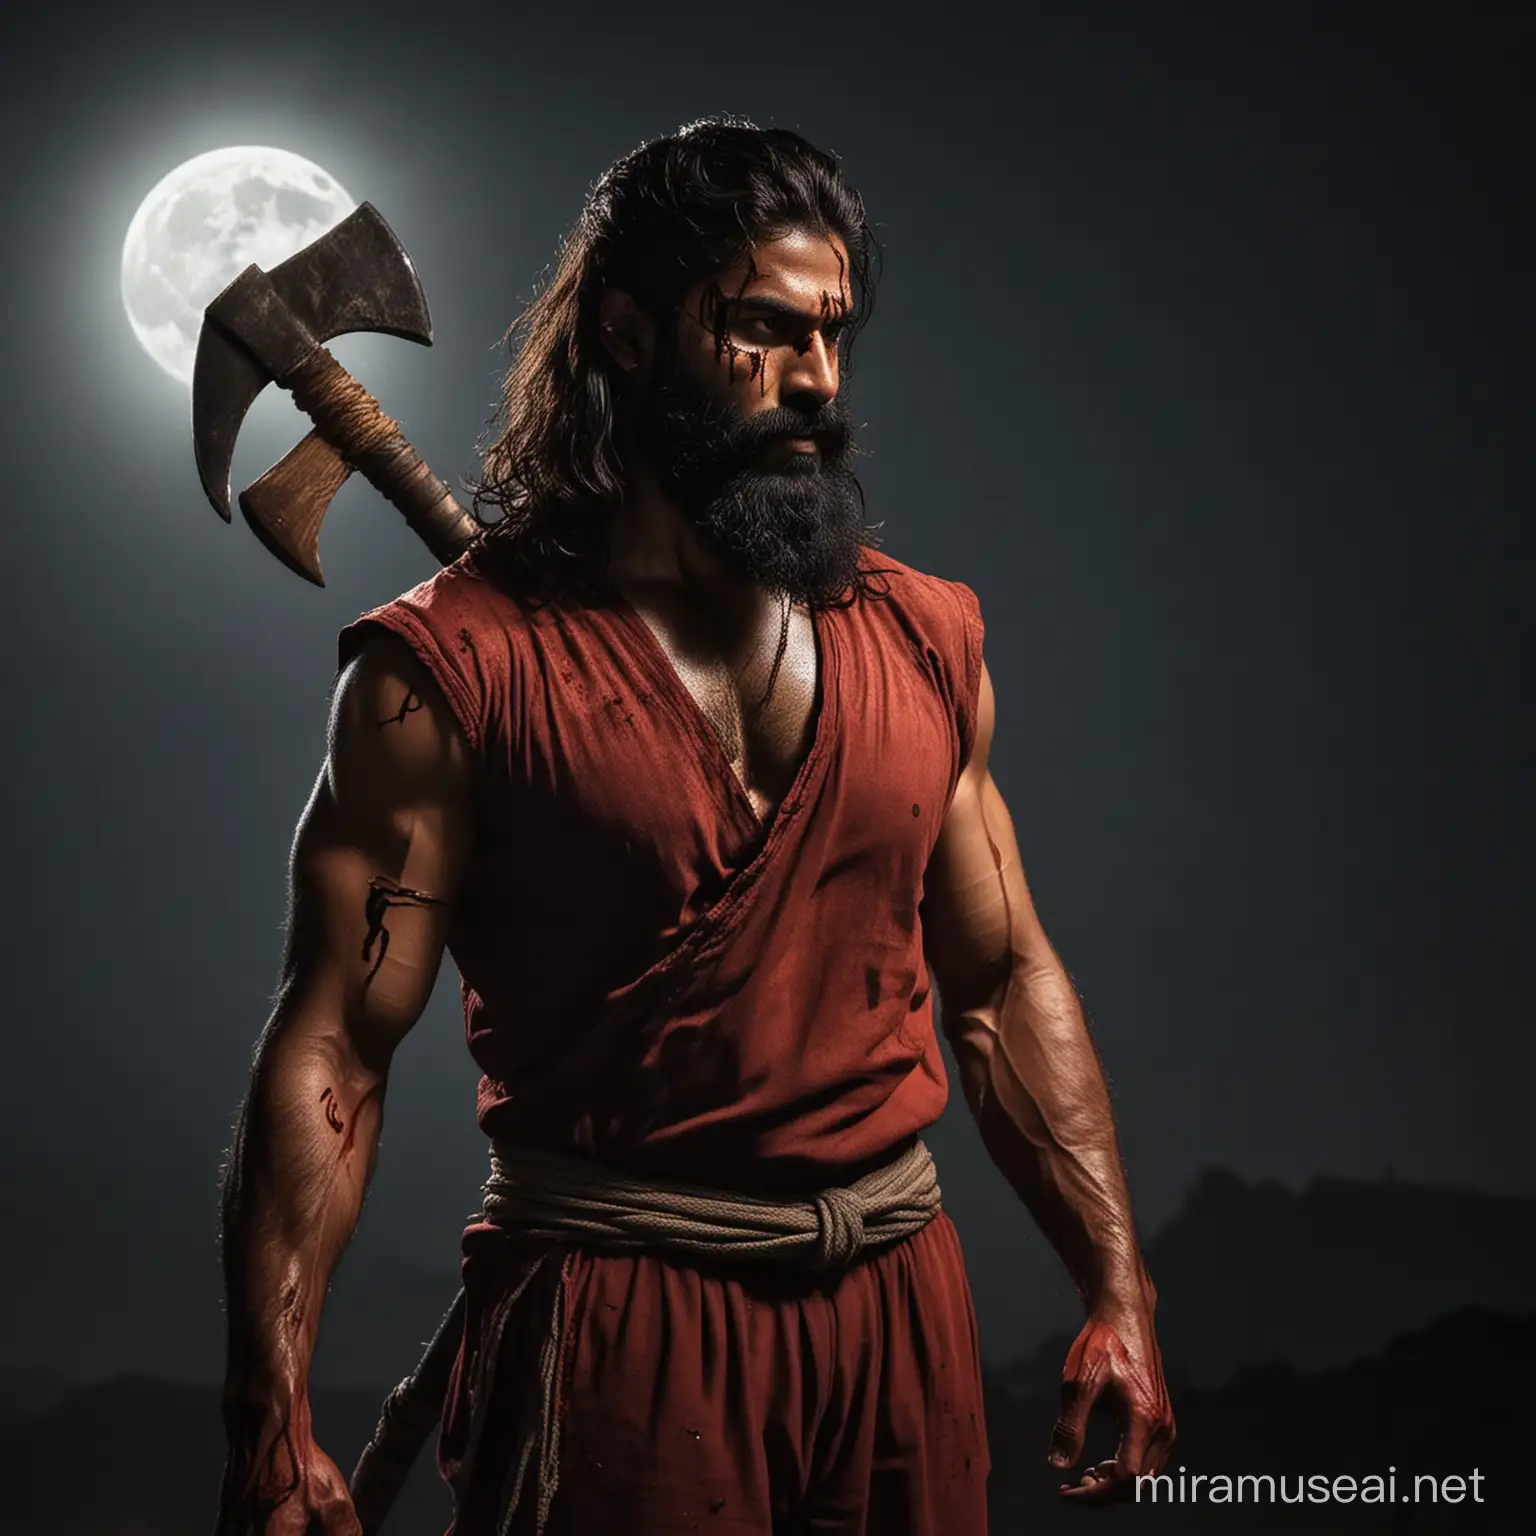 Side Profile of Modern day Parshuram in flowing beard and long hair and track suit with an axe slung across his shoulder, his eyes intense and blood shot his face partly lit by the moonlight

 